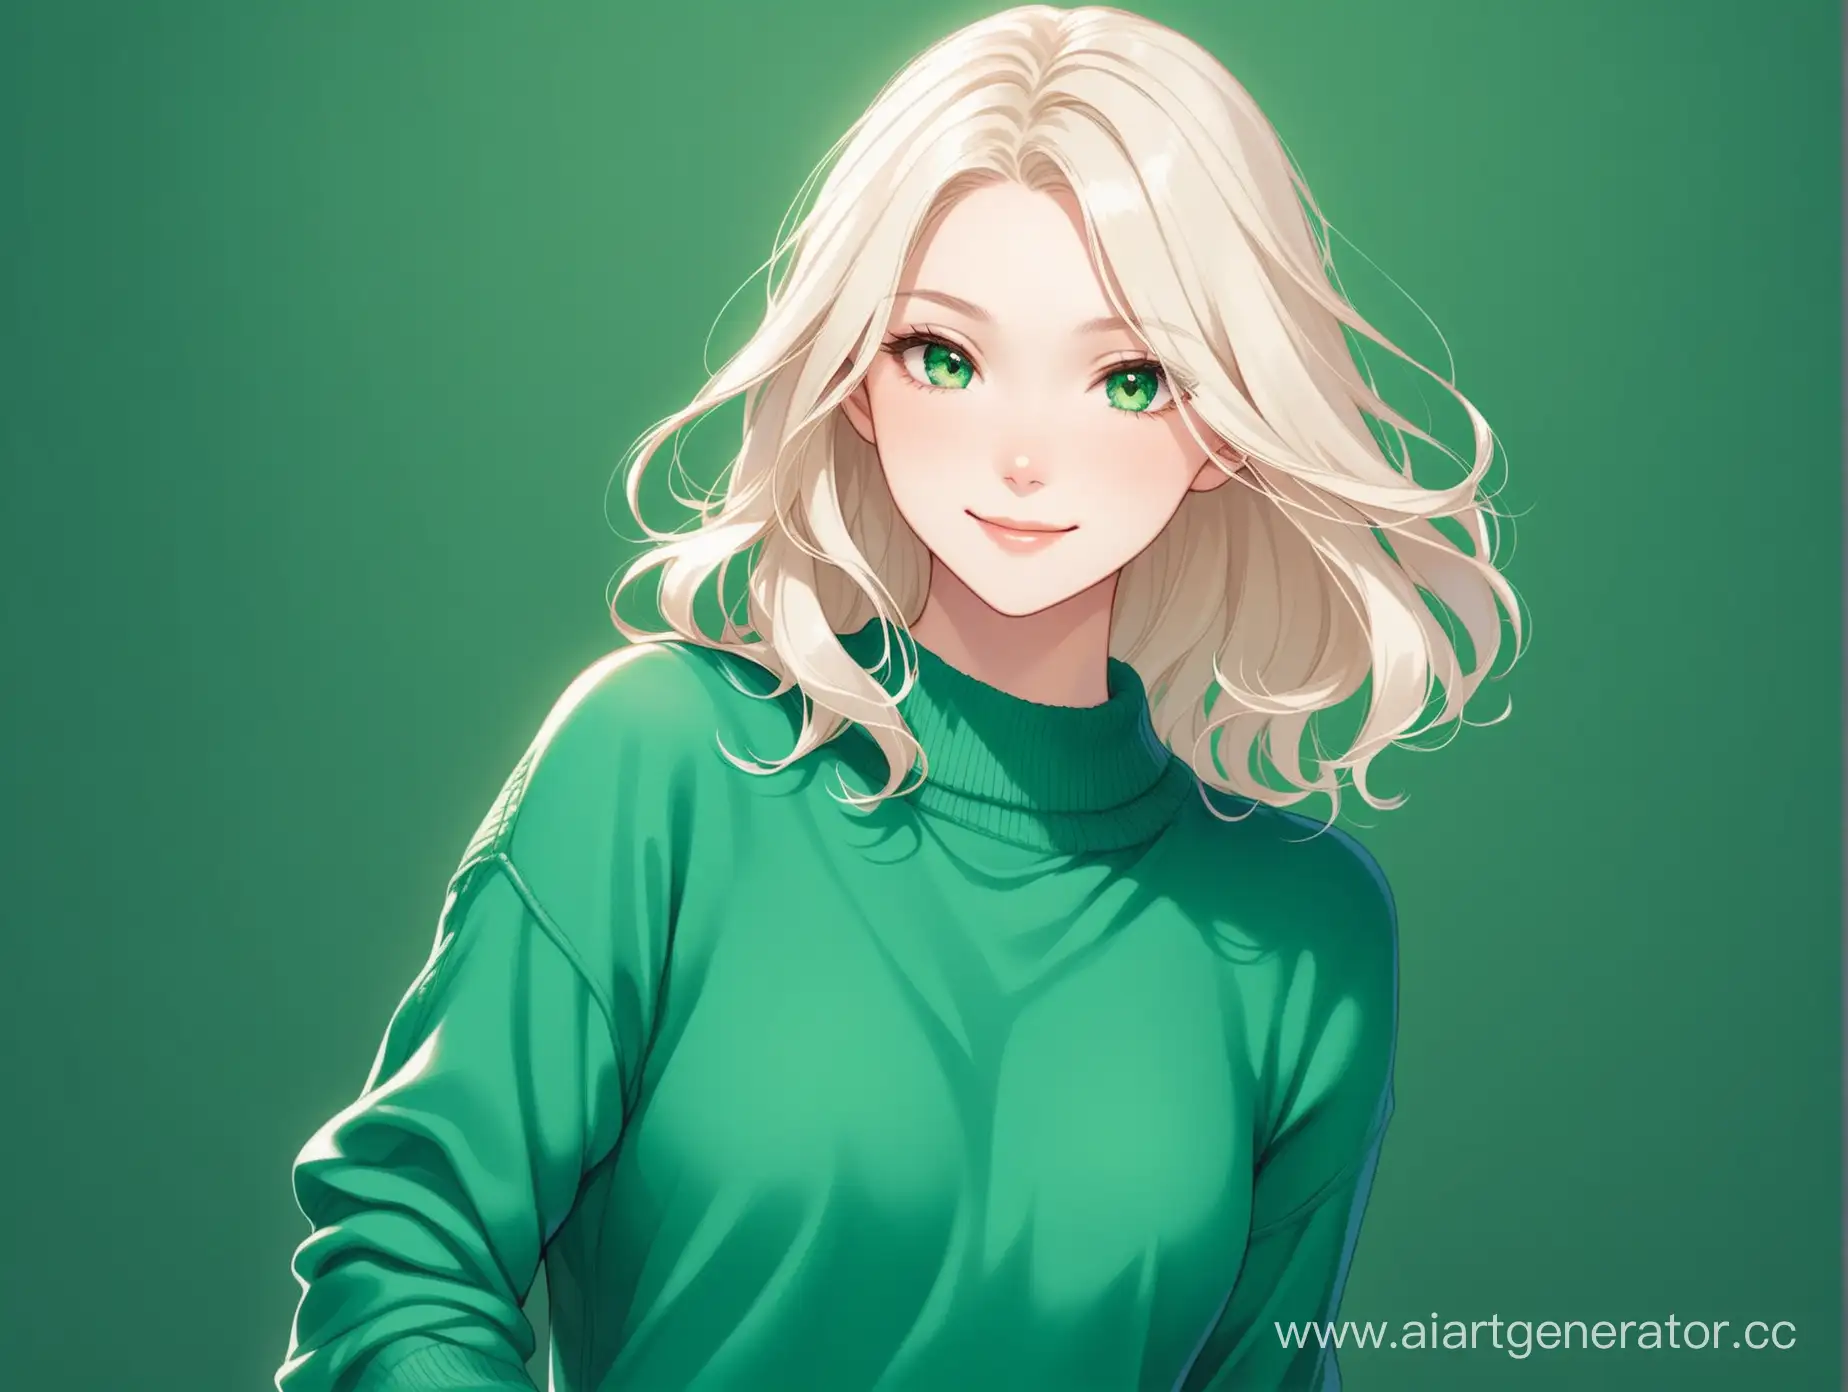  Woman with shoulder-length platinum blonde hair that falls in loose waves around her face. Her eyes are emerald green, has a gentle smile  and  slender figure, with delicate features and fair skin. She wears soft sweaters and jeans.